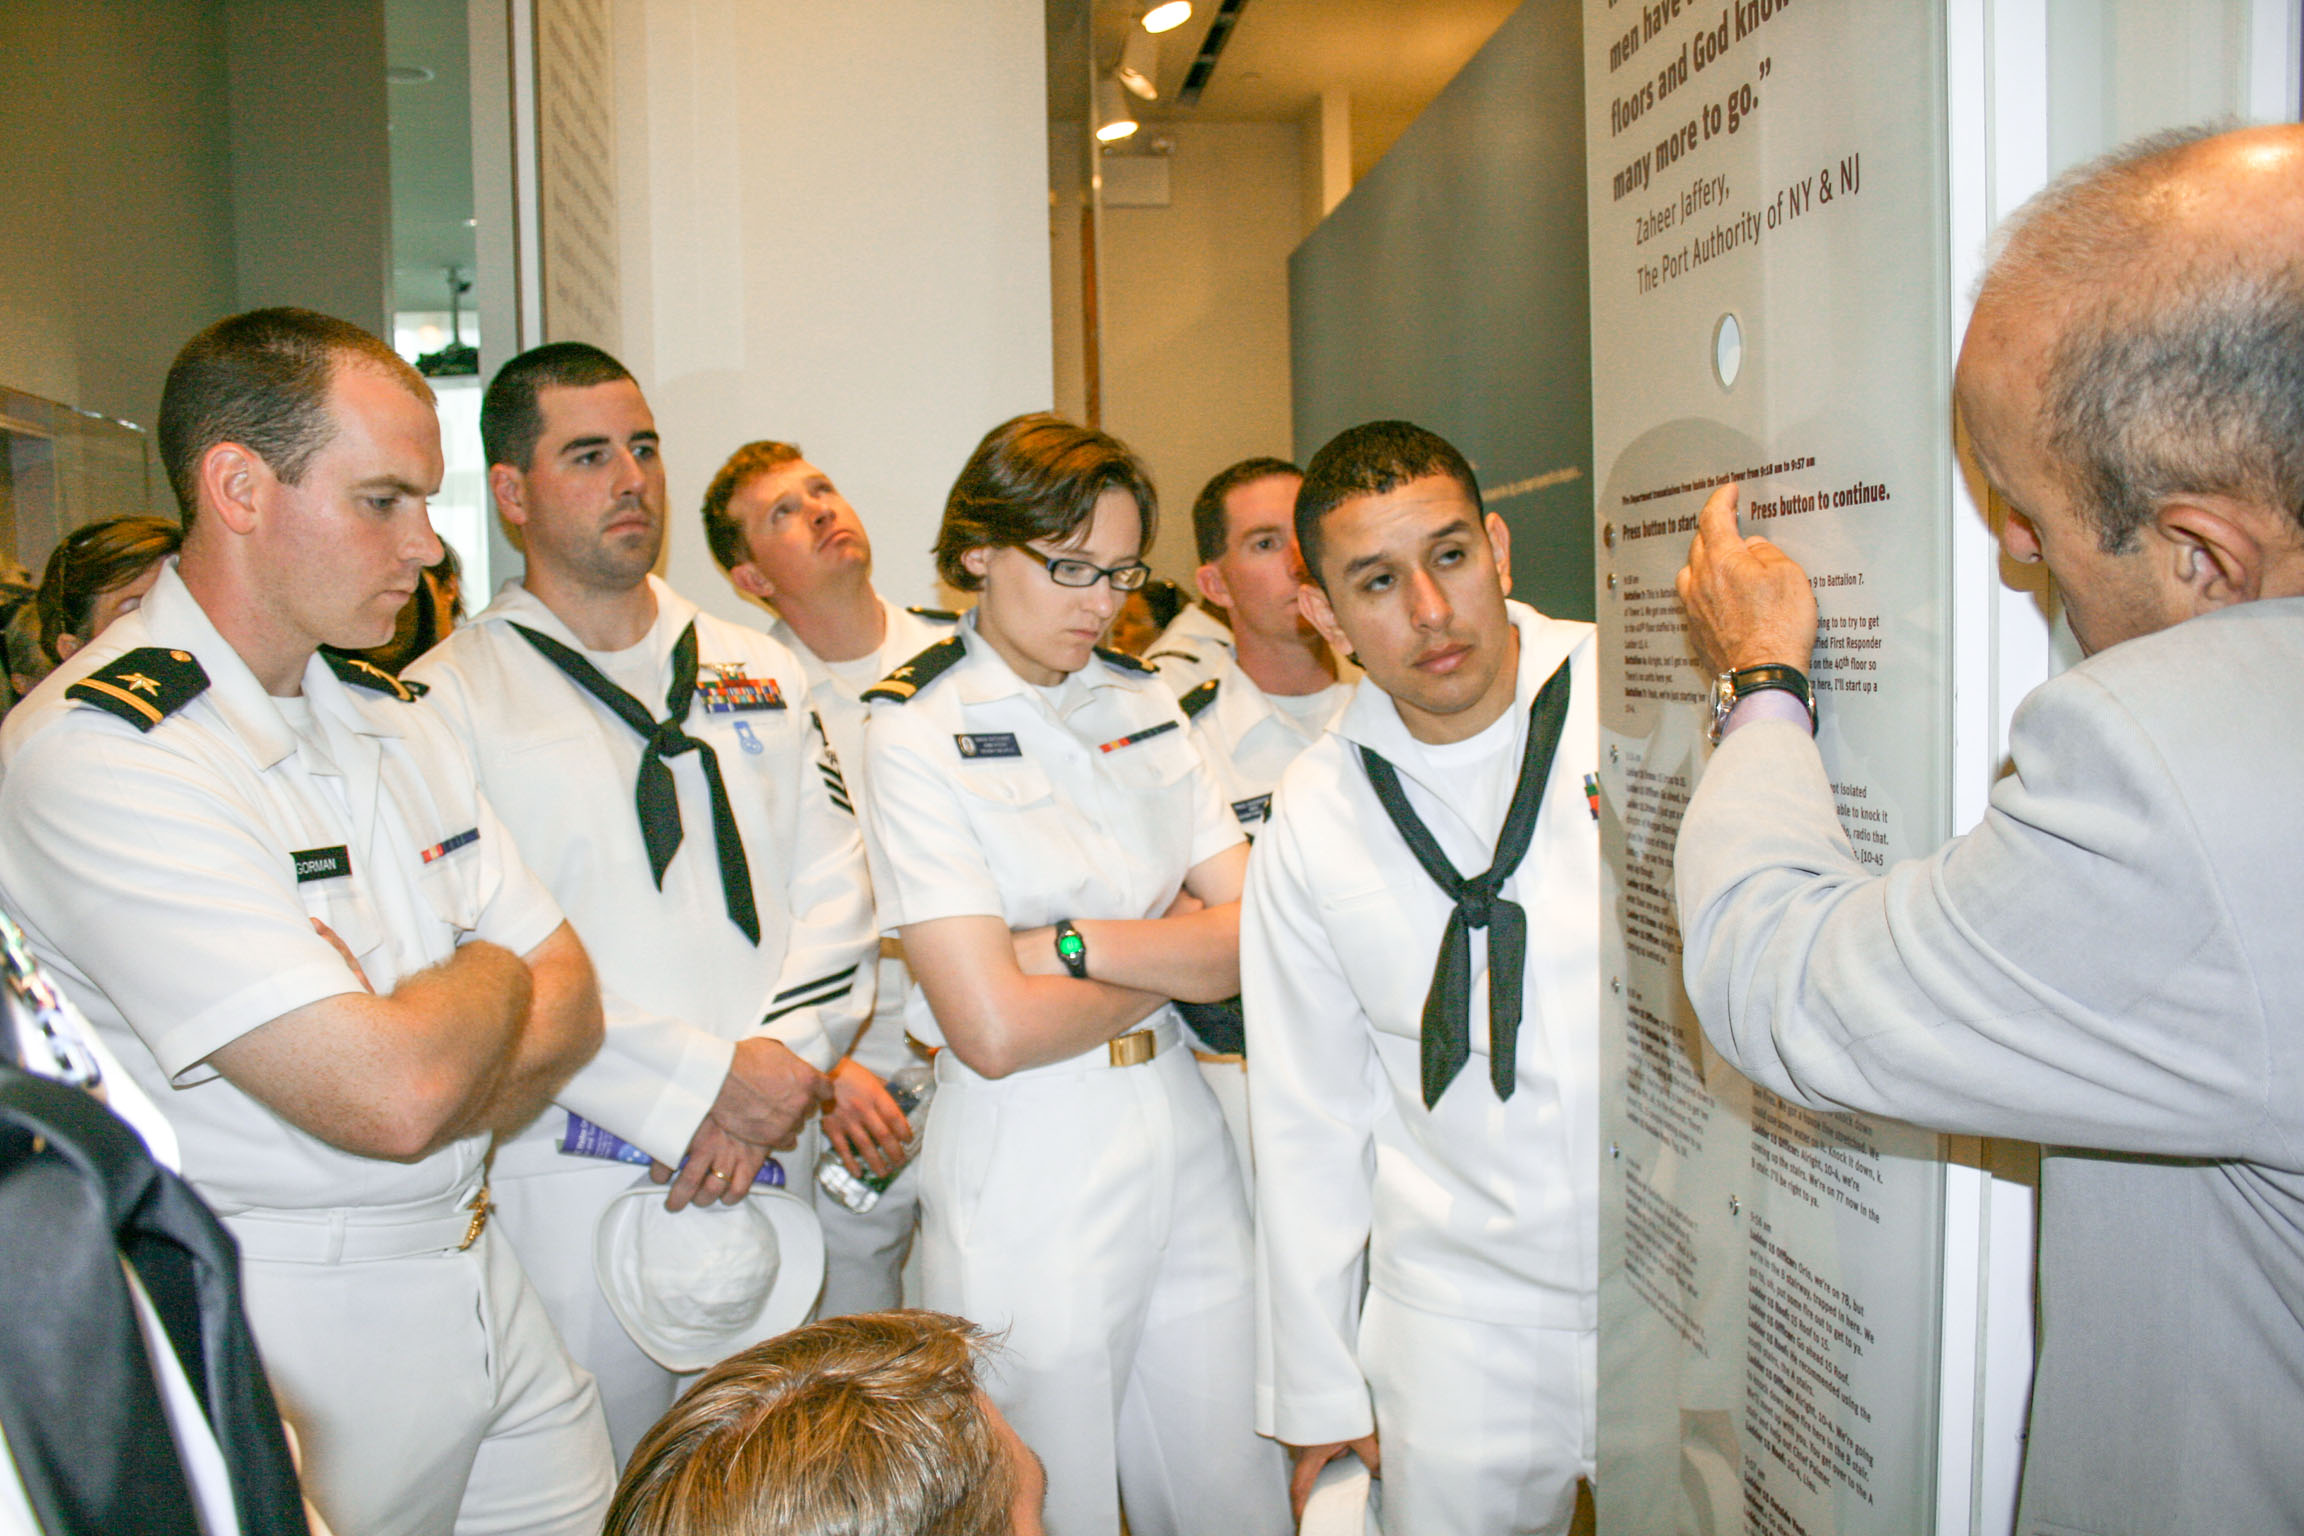 Crew members of the USS New York with Lee Ielpi at the 9/11 Tribute Center.